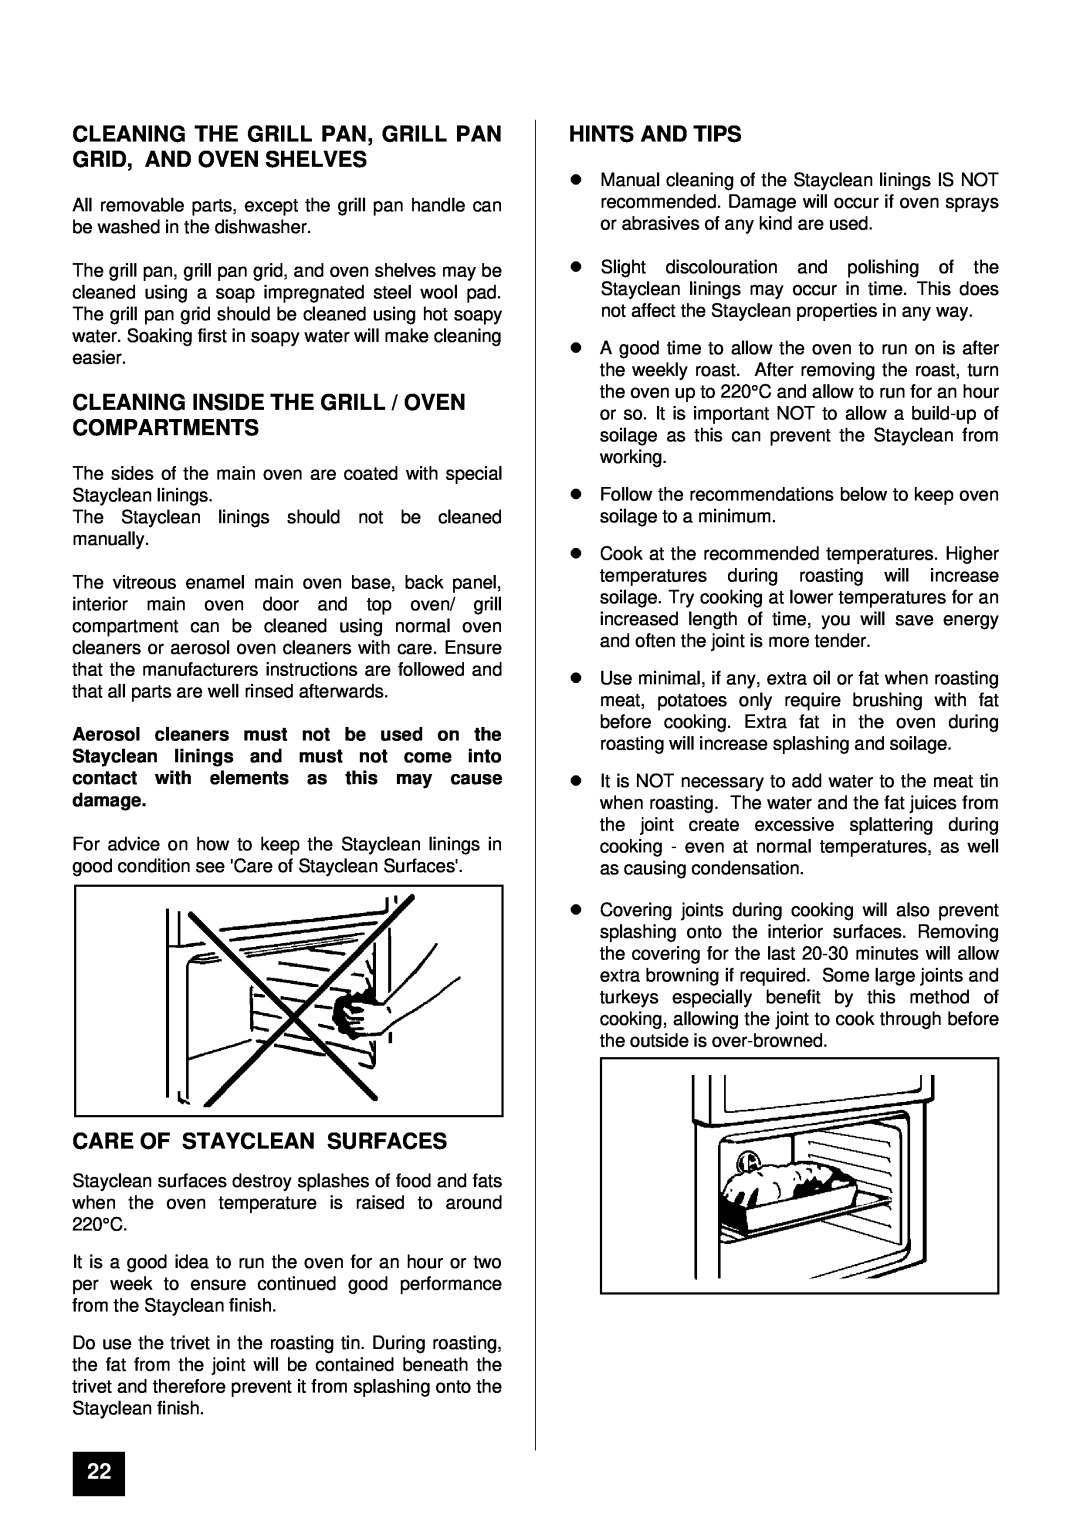 Tricity Bendix SI 055 Cleaning Inside The Grill / Oven Compartments, Care Of Stayclean Surfaces, Hints And Tips 